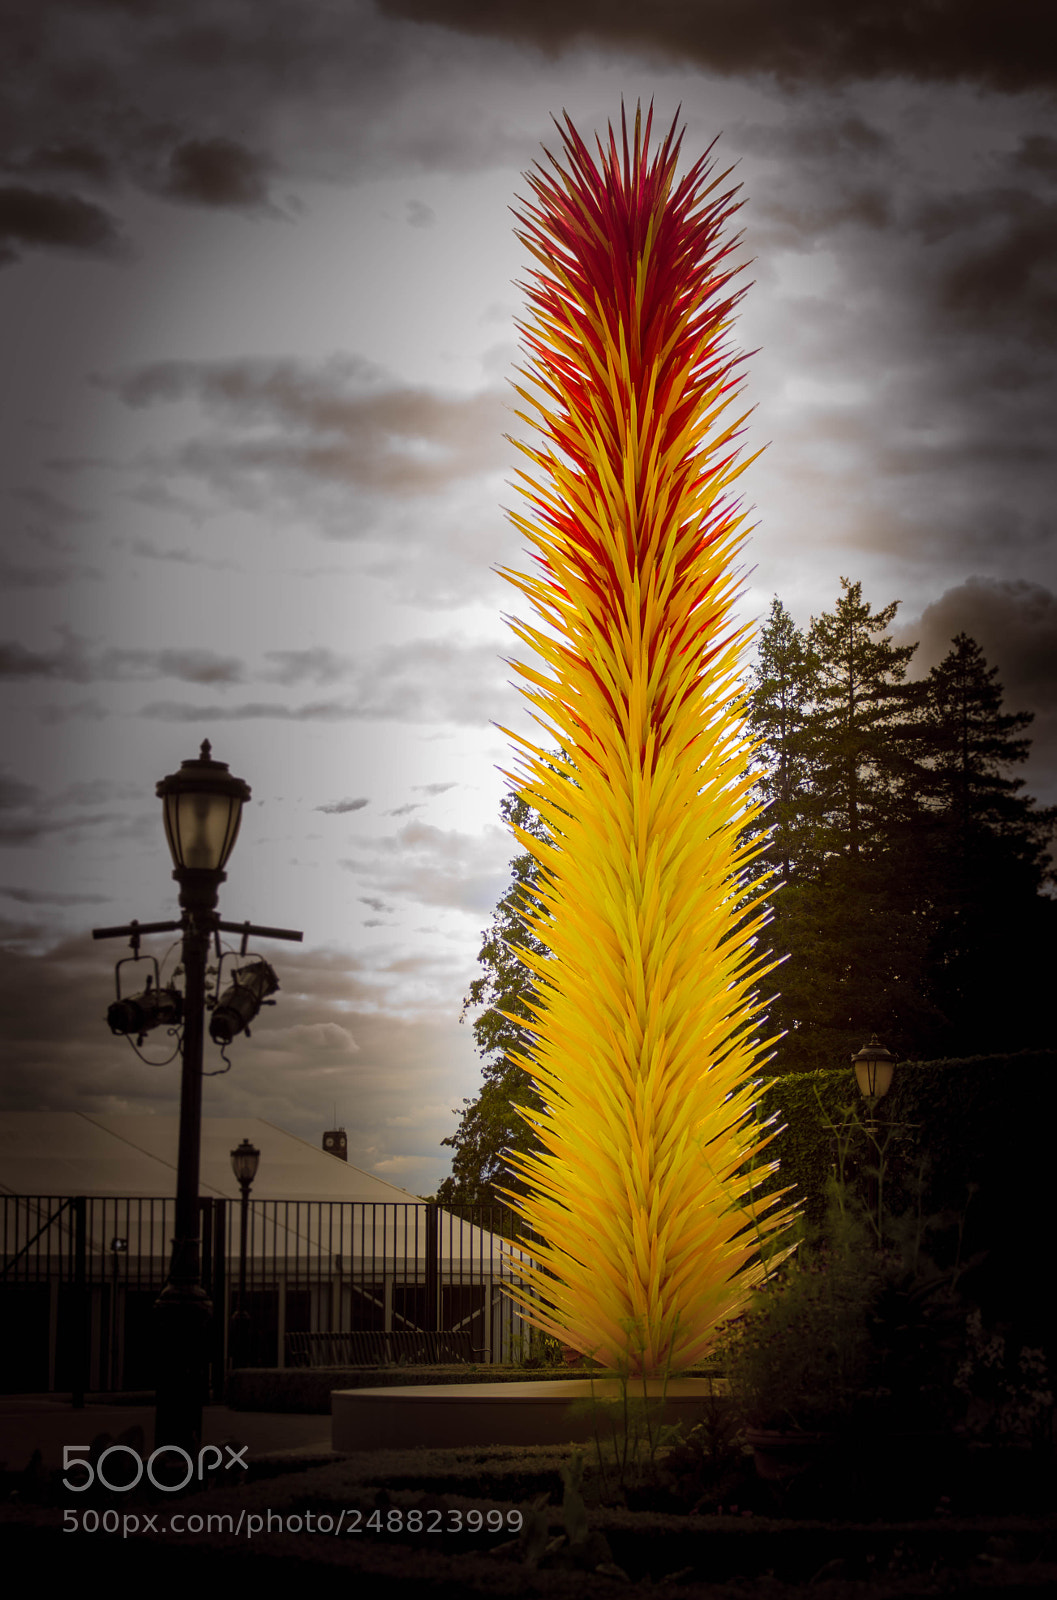 Sony a99 II sample photo. Dale chihuly 'scarlet and photography